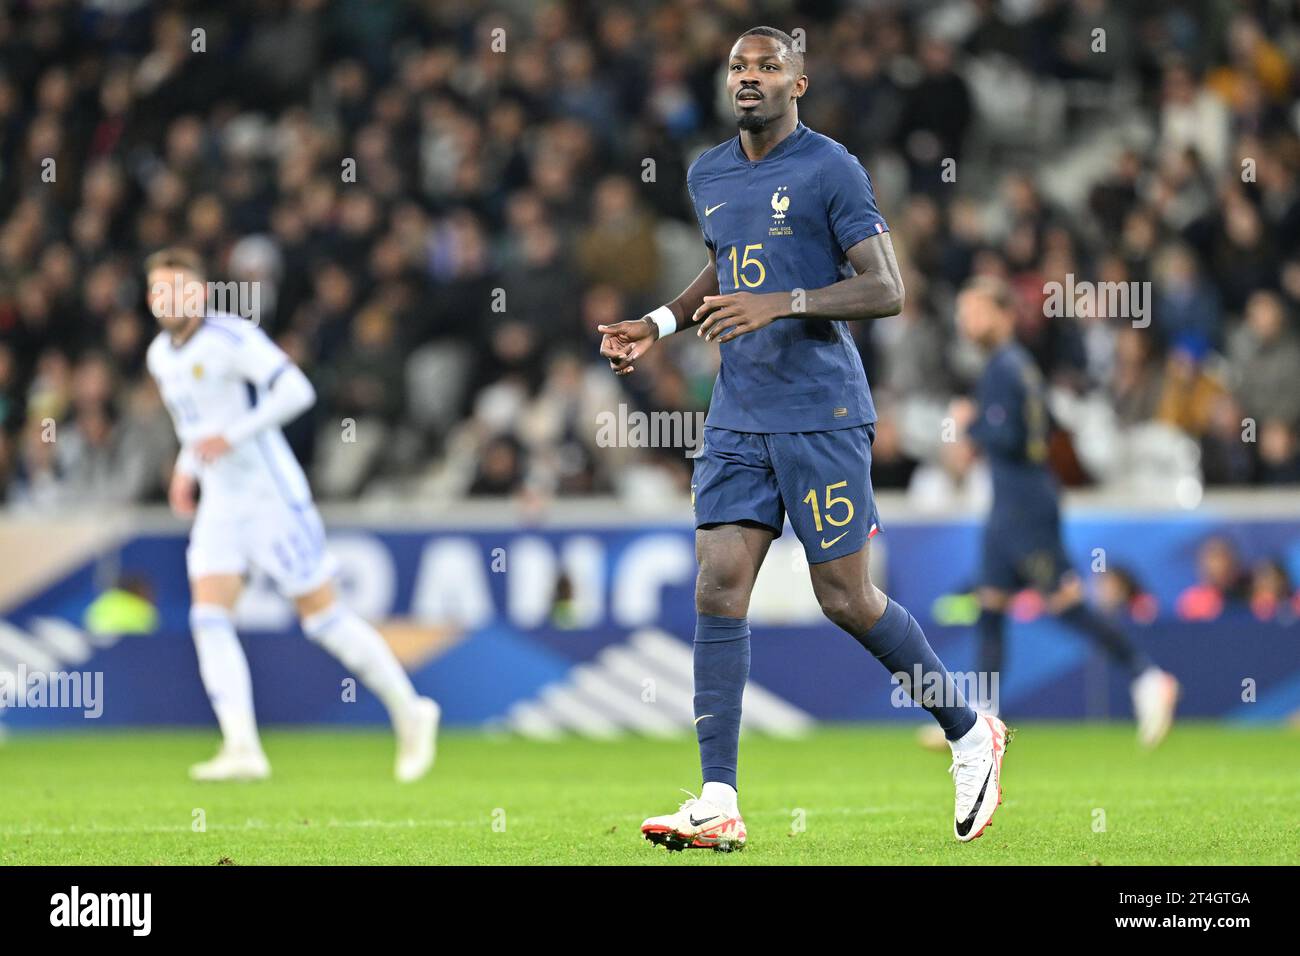 Marcus Thuram (15) of France pictured during a soccer game between the national teams of France and Scotland in friendly game, on October 17 , 2023 in Lille, France. (Photo by David Catry / Sportpix) Stock Photo